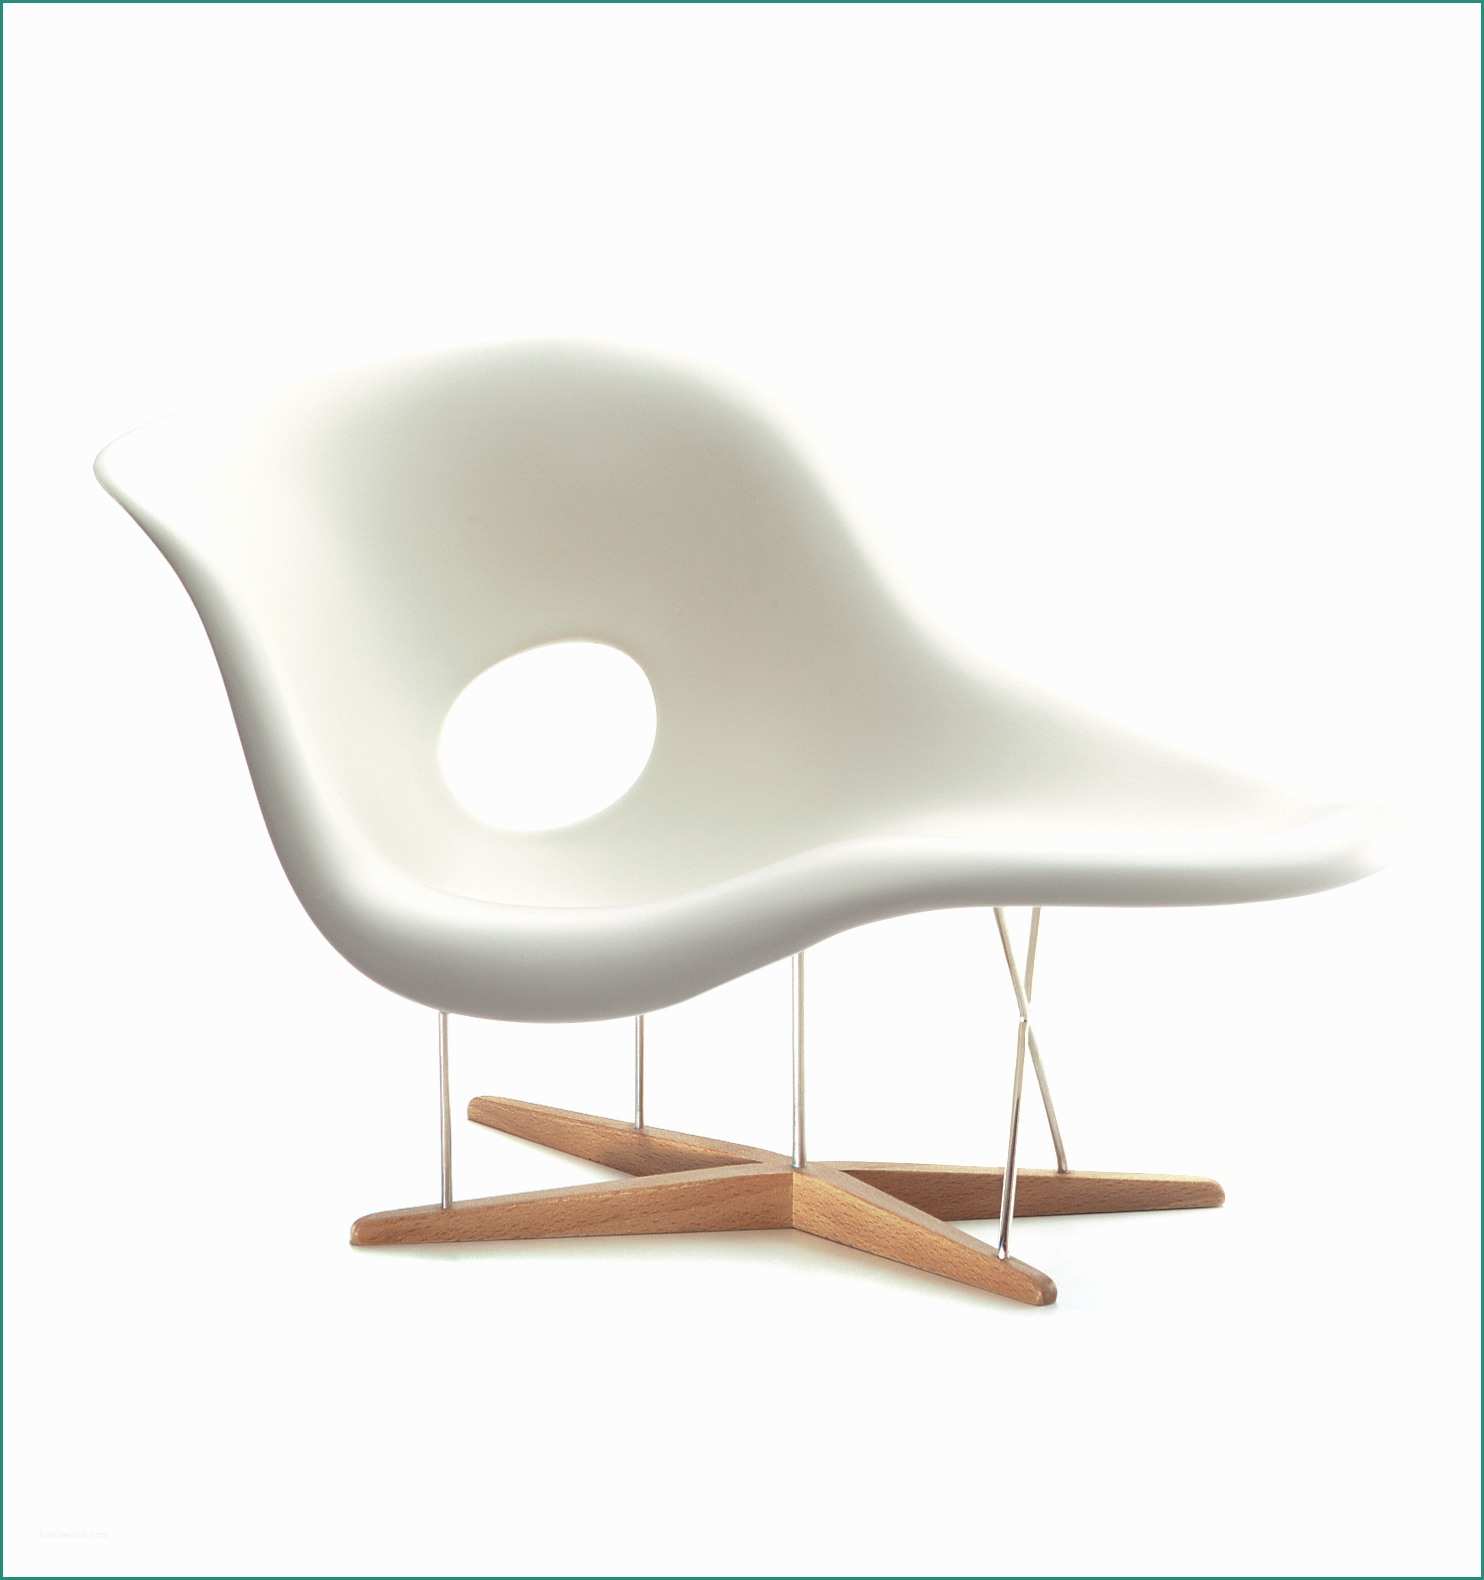 Sedia Charles Eames E Chaise Eiffel Eames Excellent Charles Eames Sthle Stunning